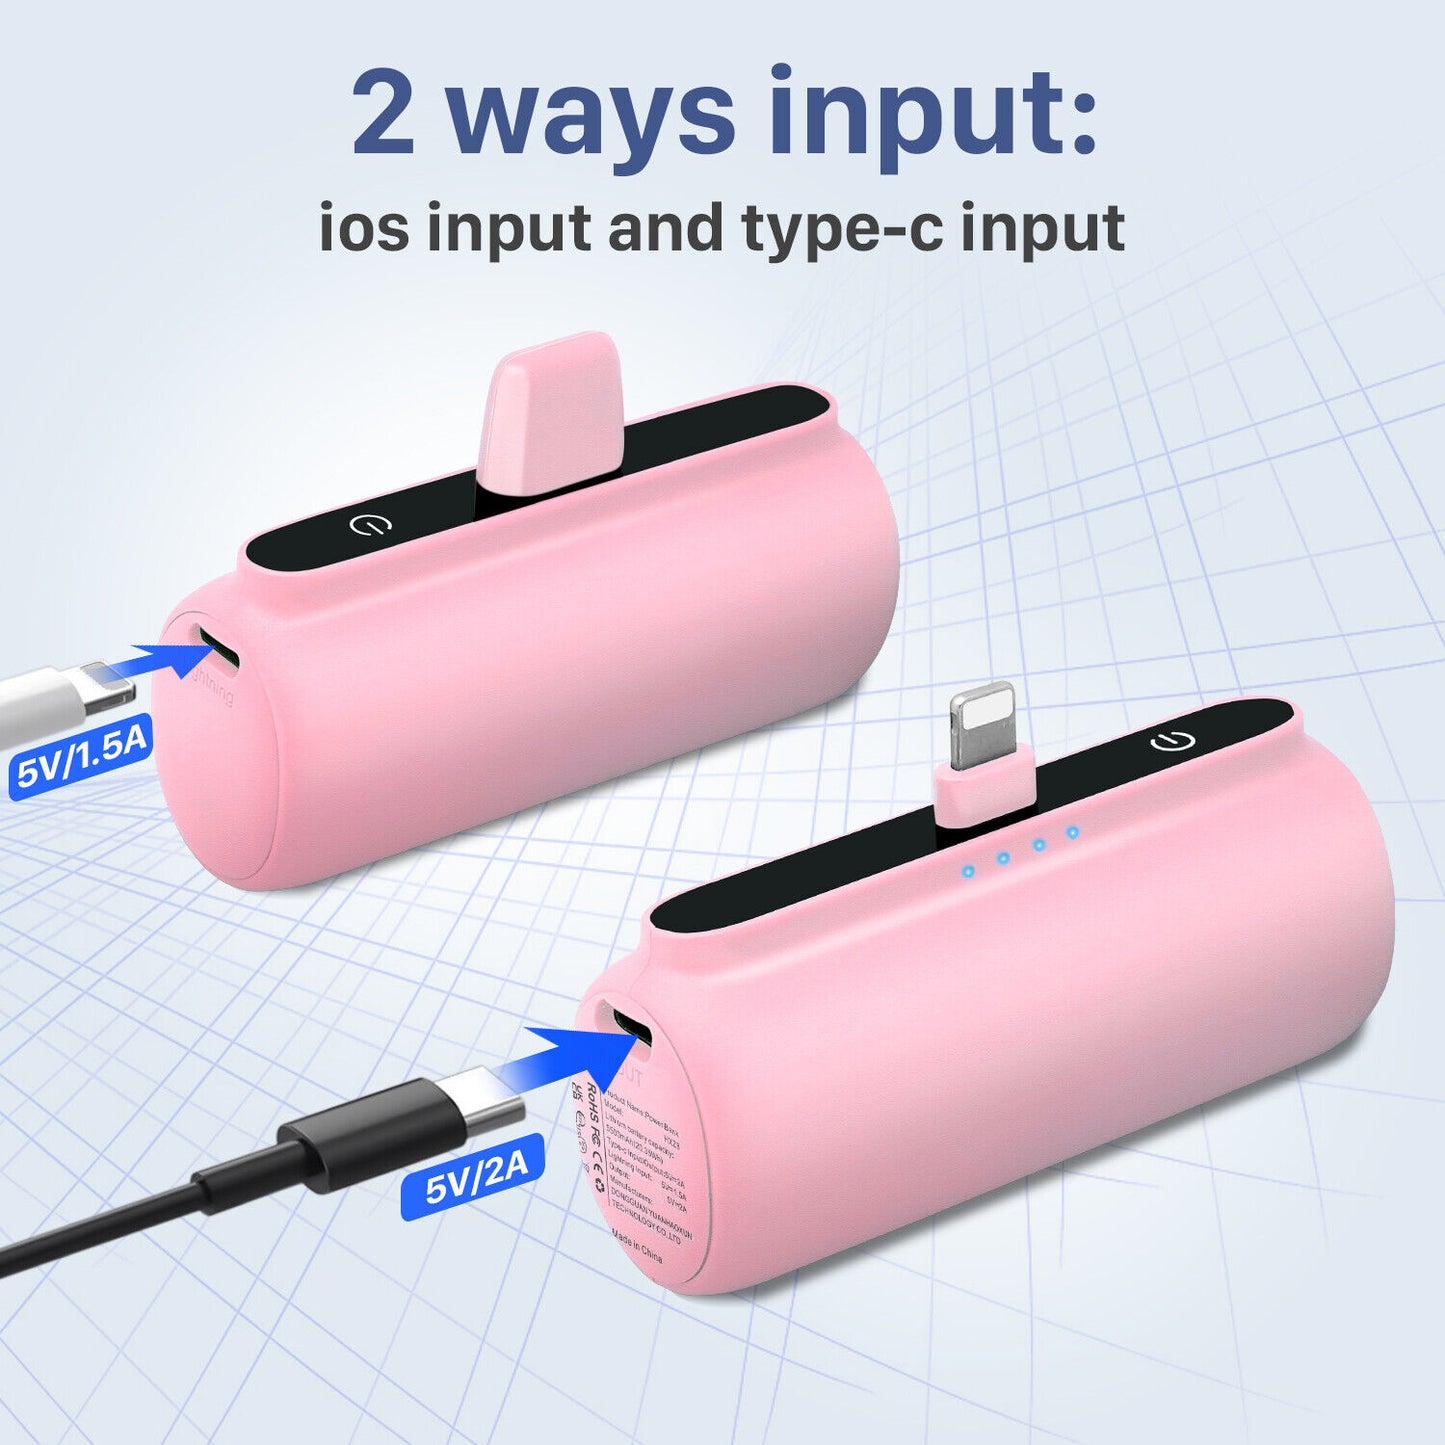 Mini Power Bank Portable Charger for Iphone or Type C Phones Instant Charging